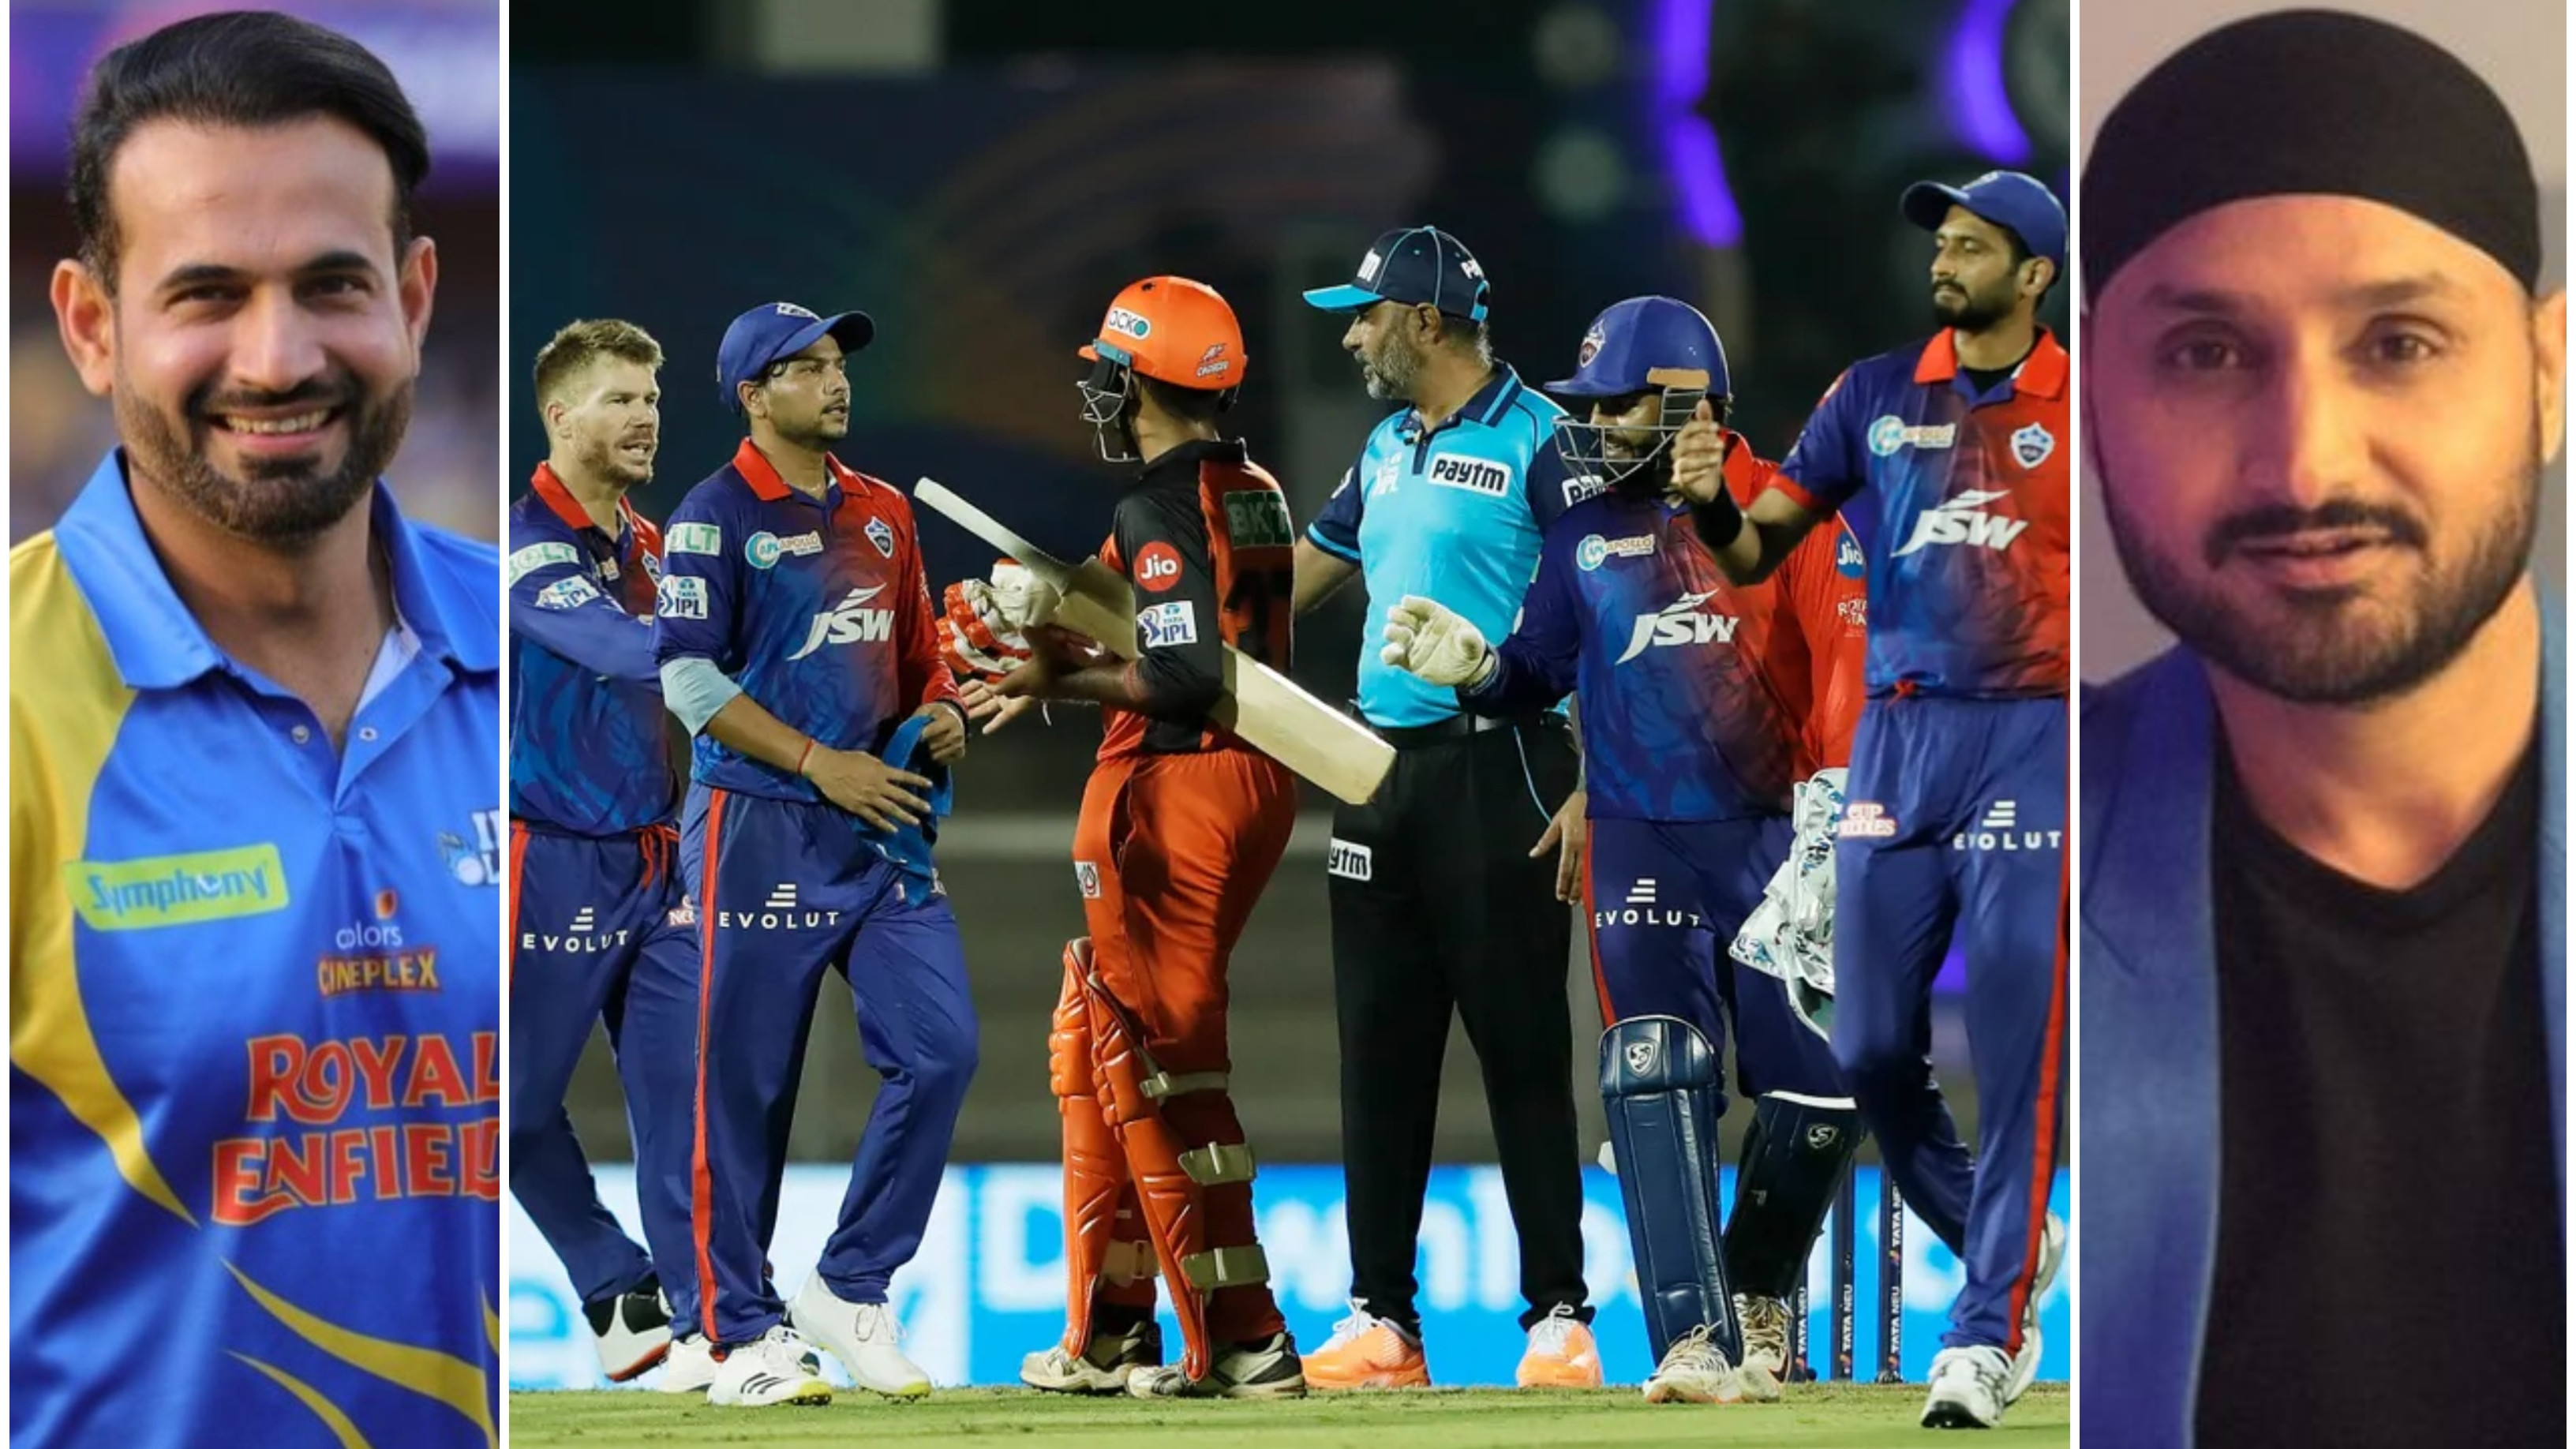 IPL 2022: Cricket fraternity reacts as all-round DC beat SRH in a high-scoring affair to keep campaign alive